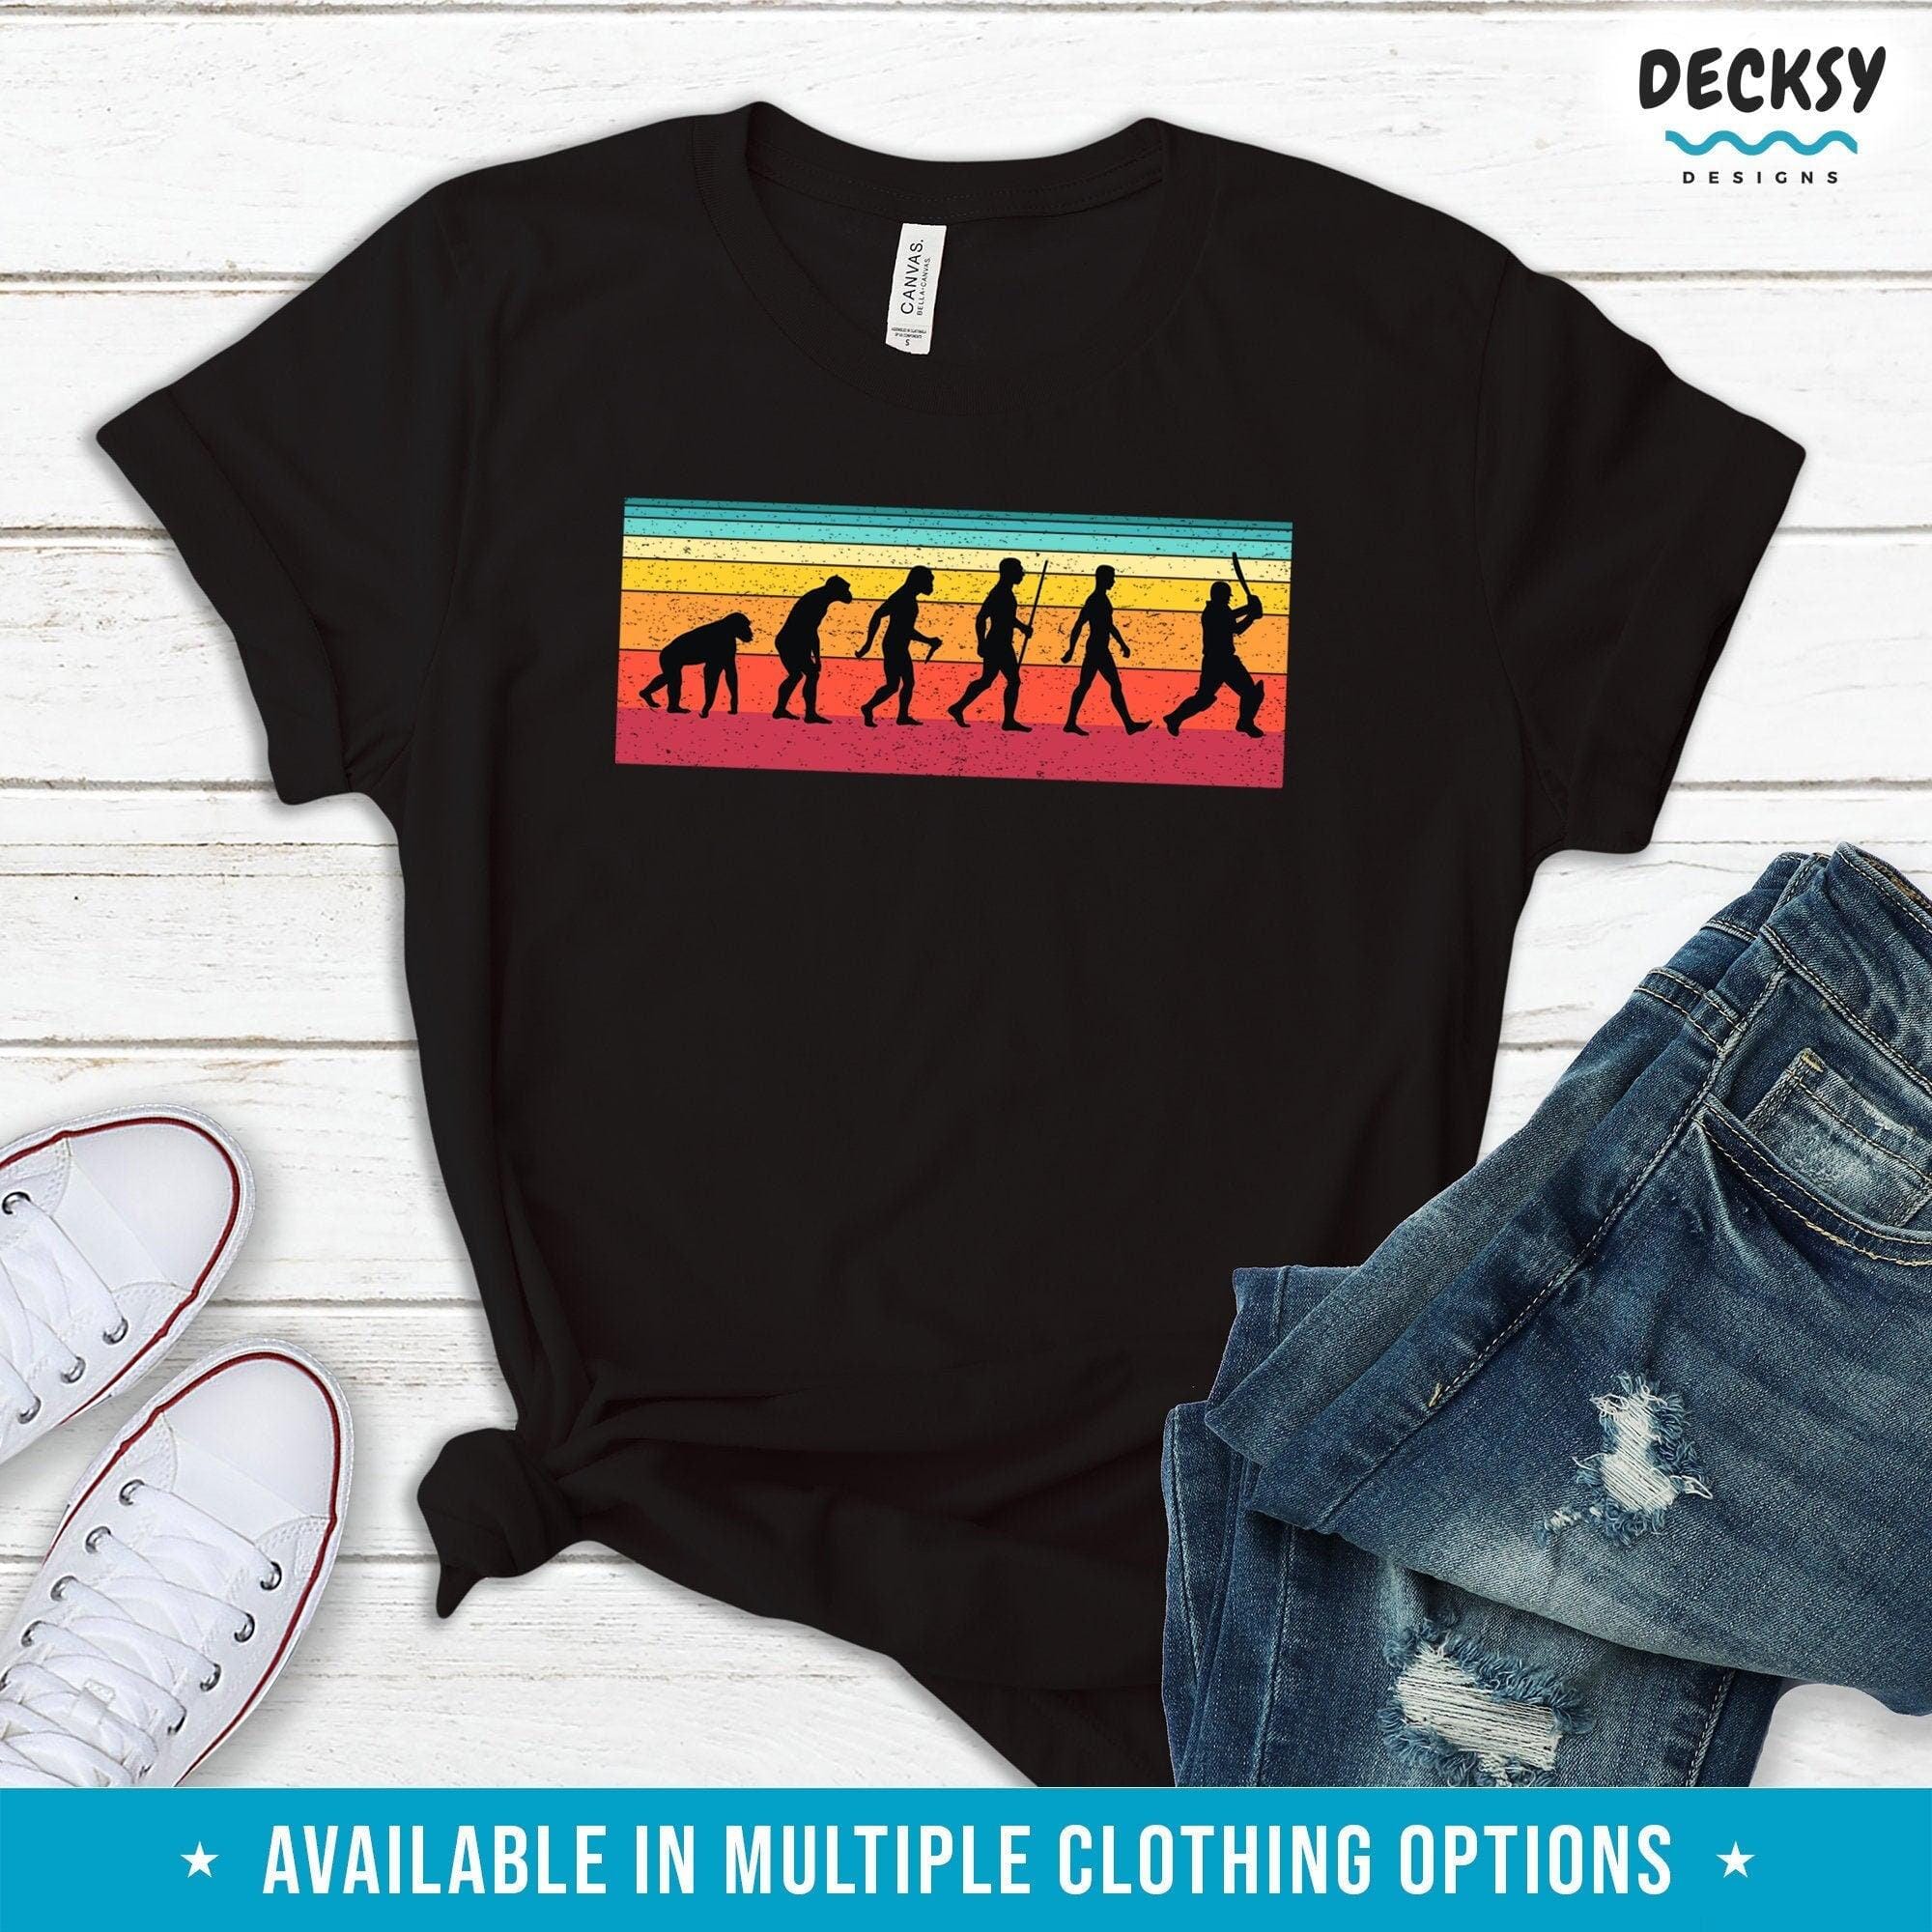 Cricket Player Shirt, Gift for Cricket Lover-Clothing:Gender-Neutral Adult Clothing:Tops & Tees:T-shirts:Graphic Tees-DecksyDesigns